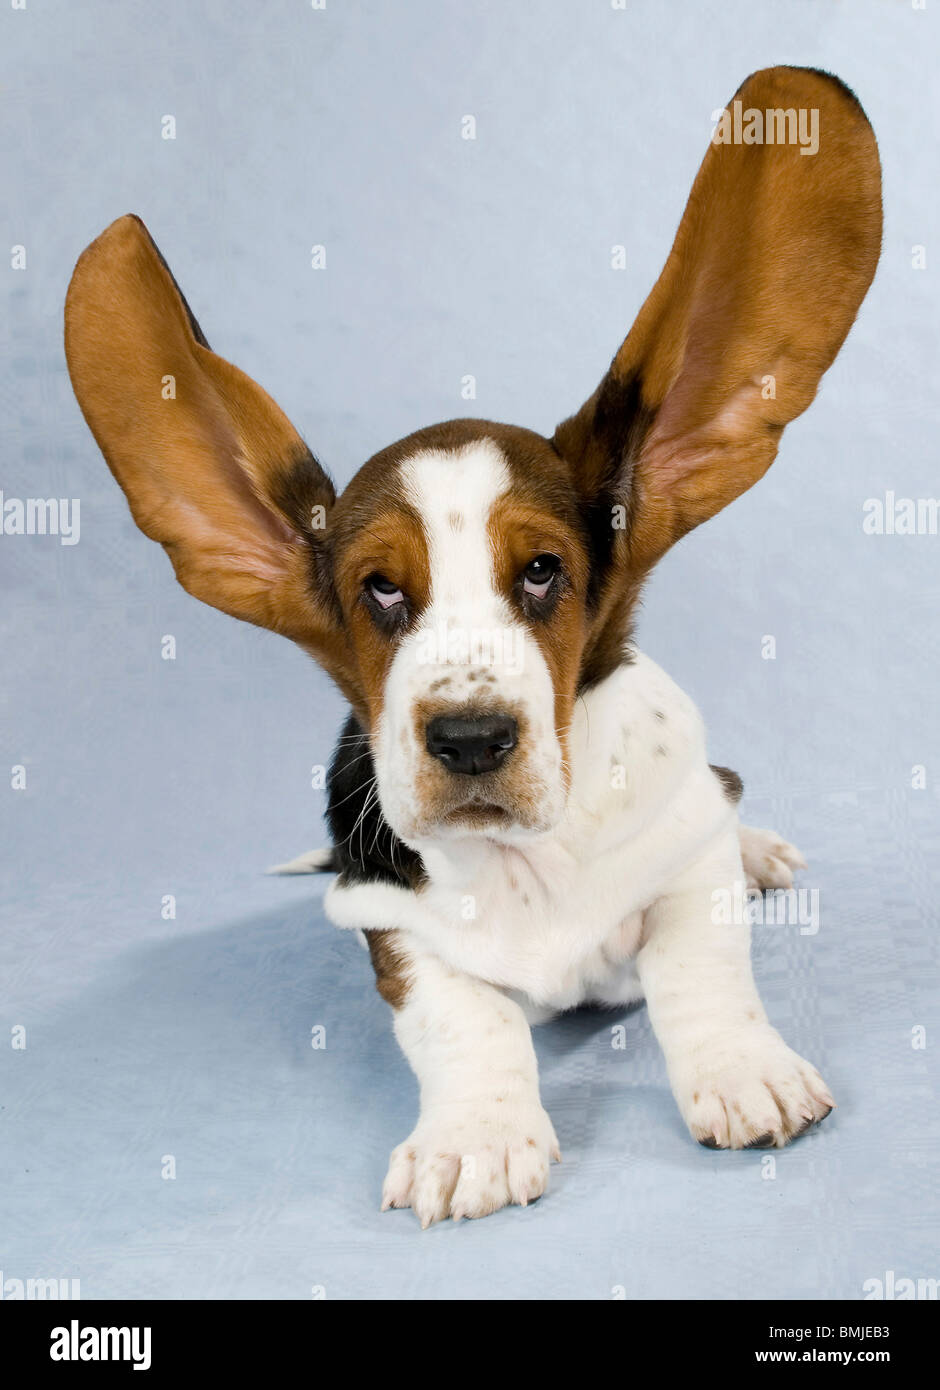 dogs with big ears